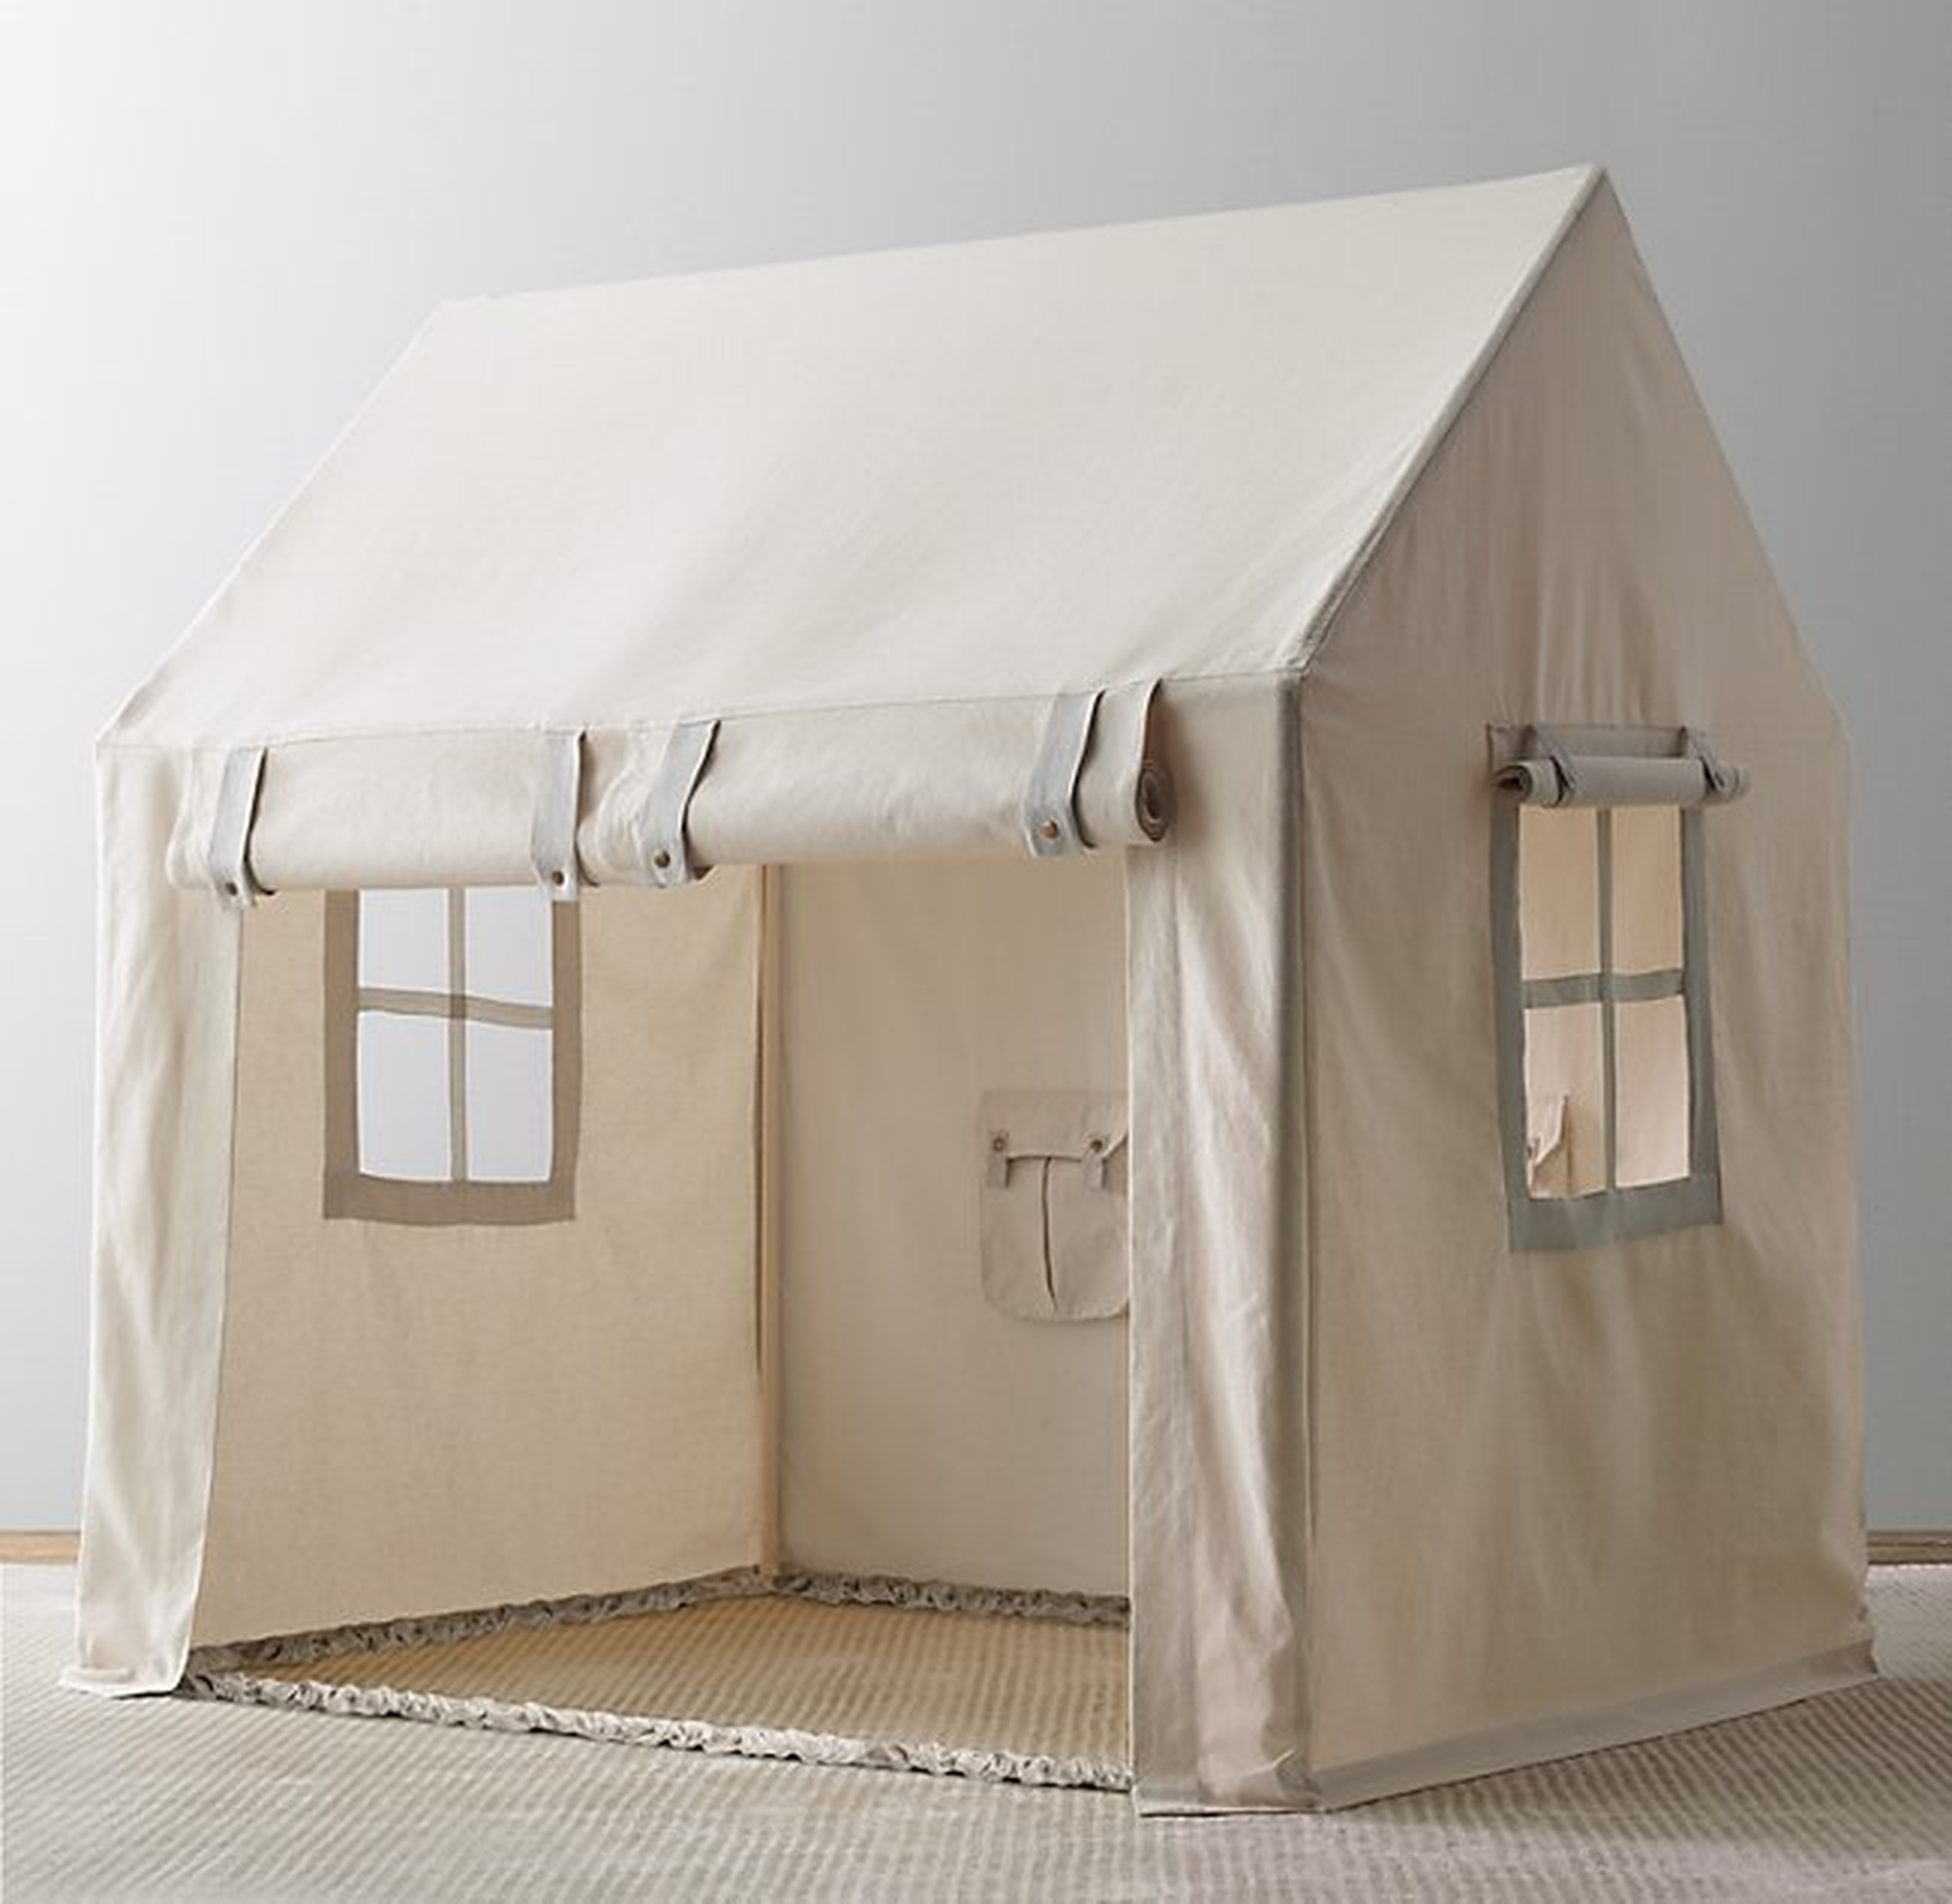 CAMP INDOOR PLAYHOUSE - NATURAL - RH Baby & Child